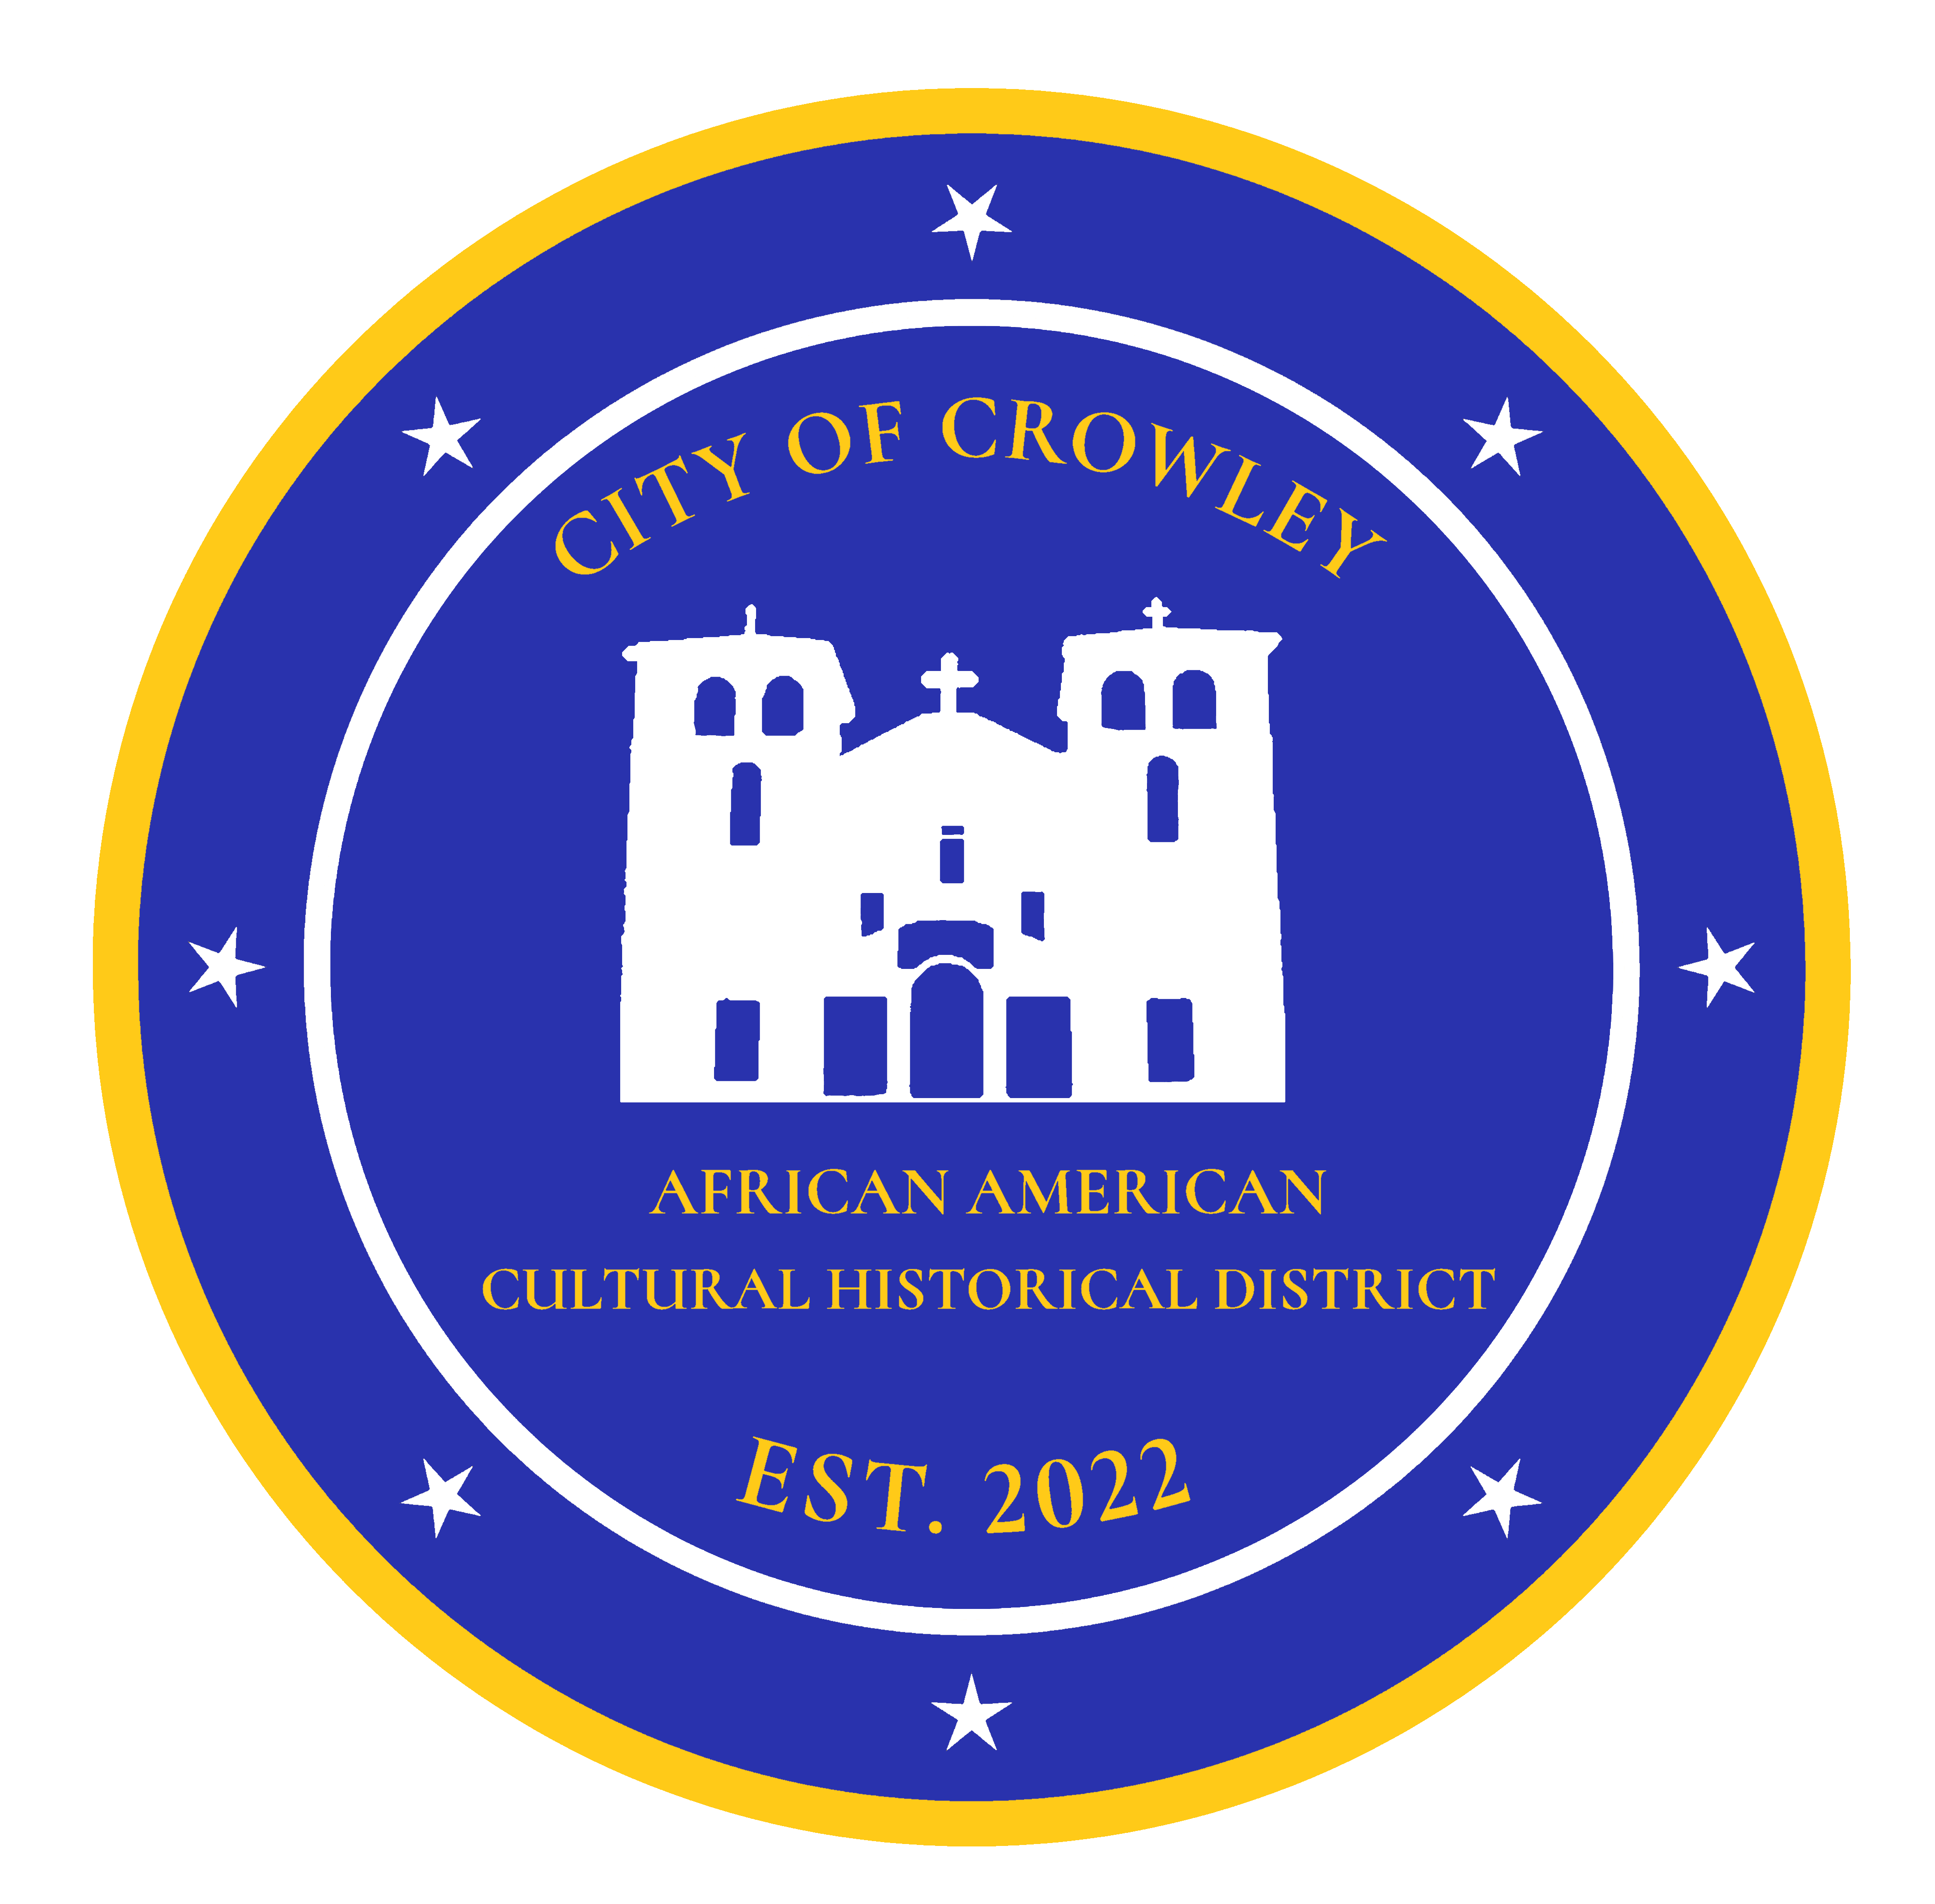 City of Crowley African American Historical District